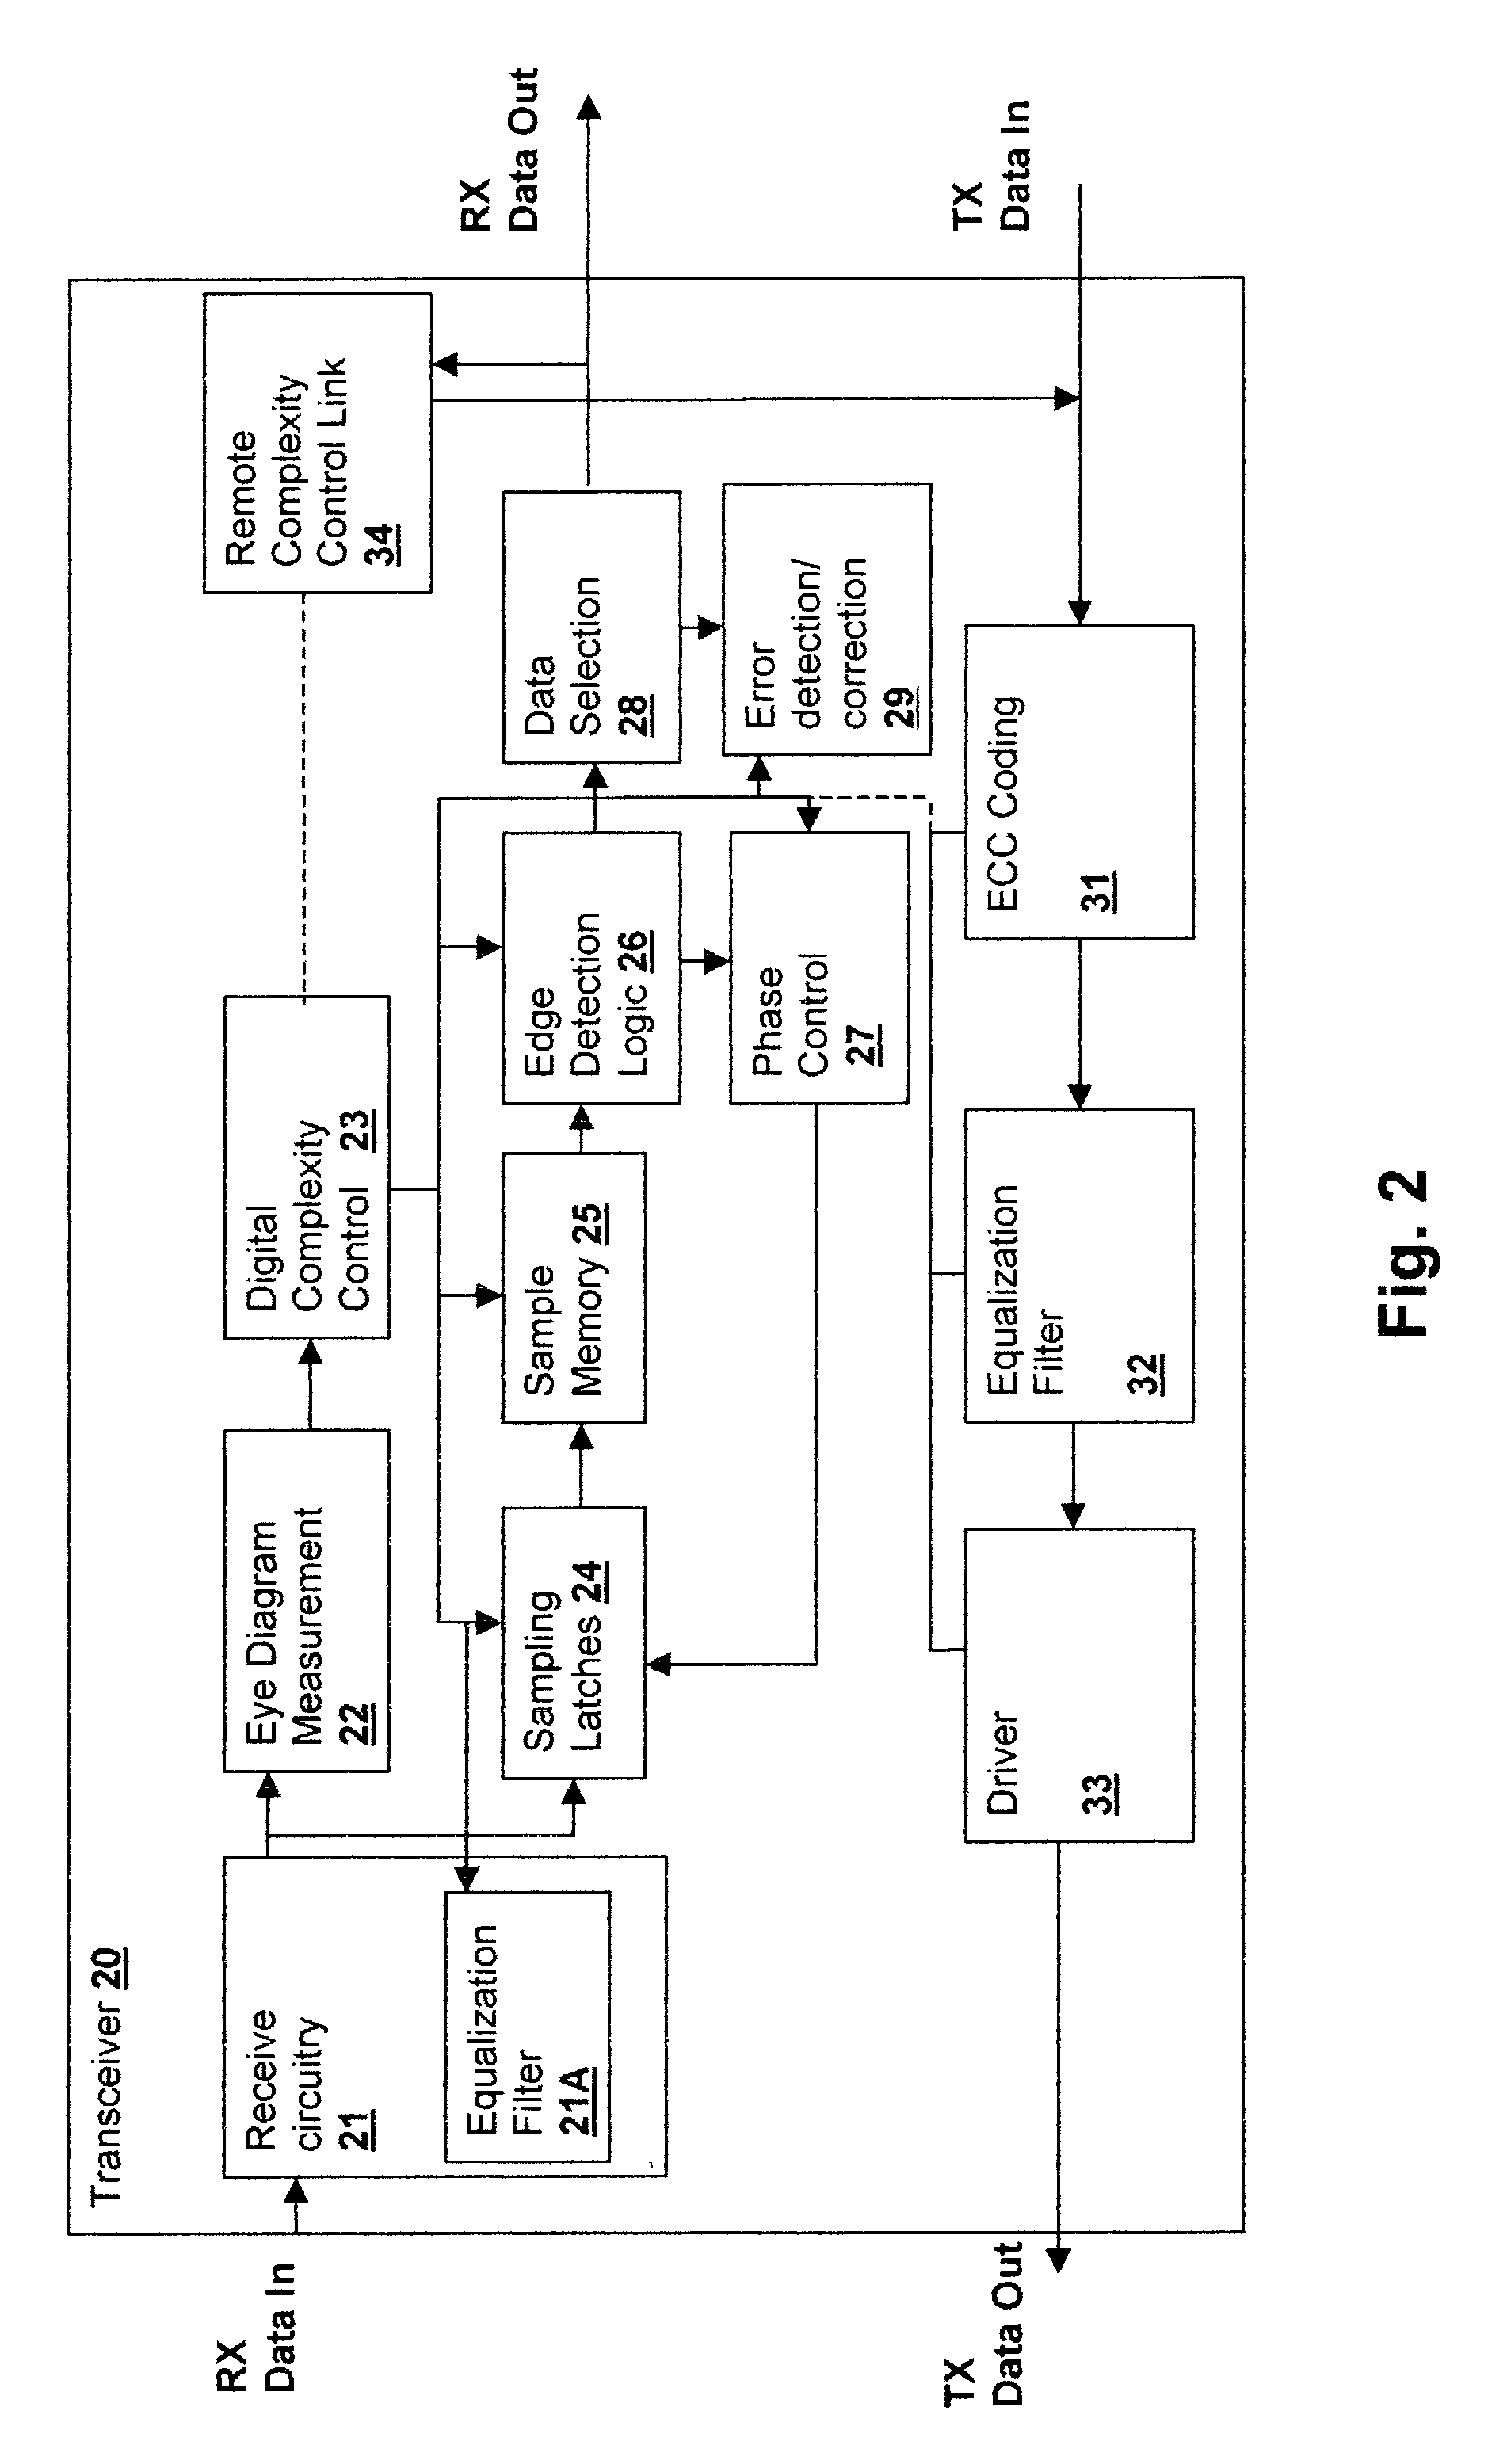 Interface transceiver power mangagement method and apparatus